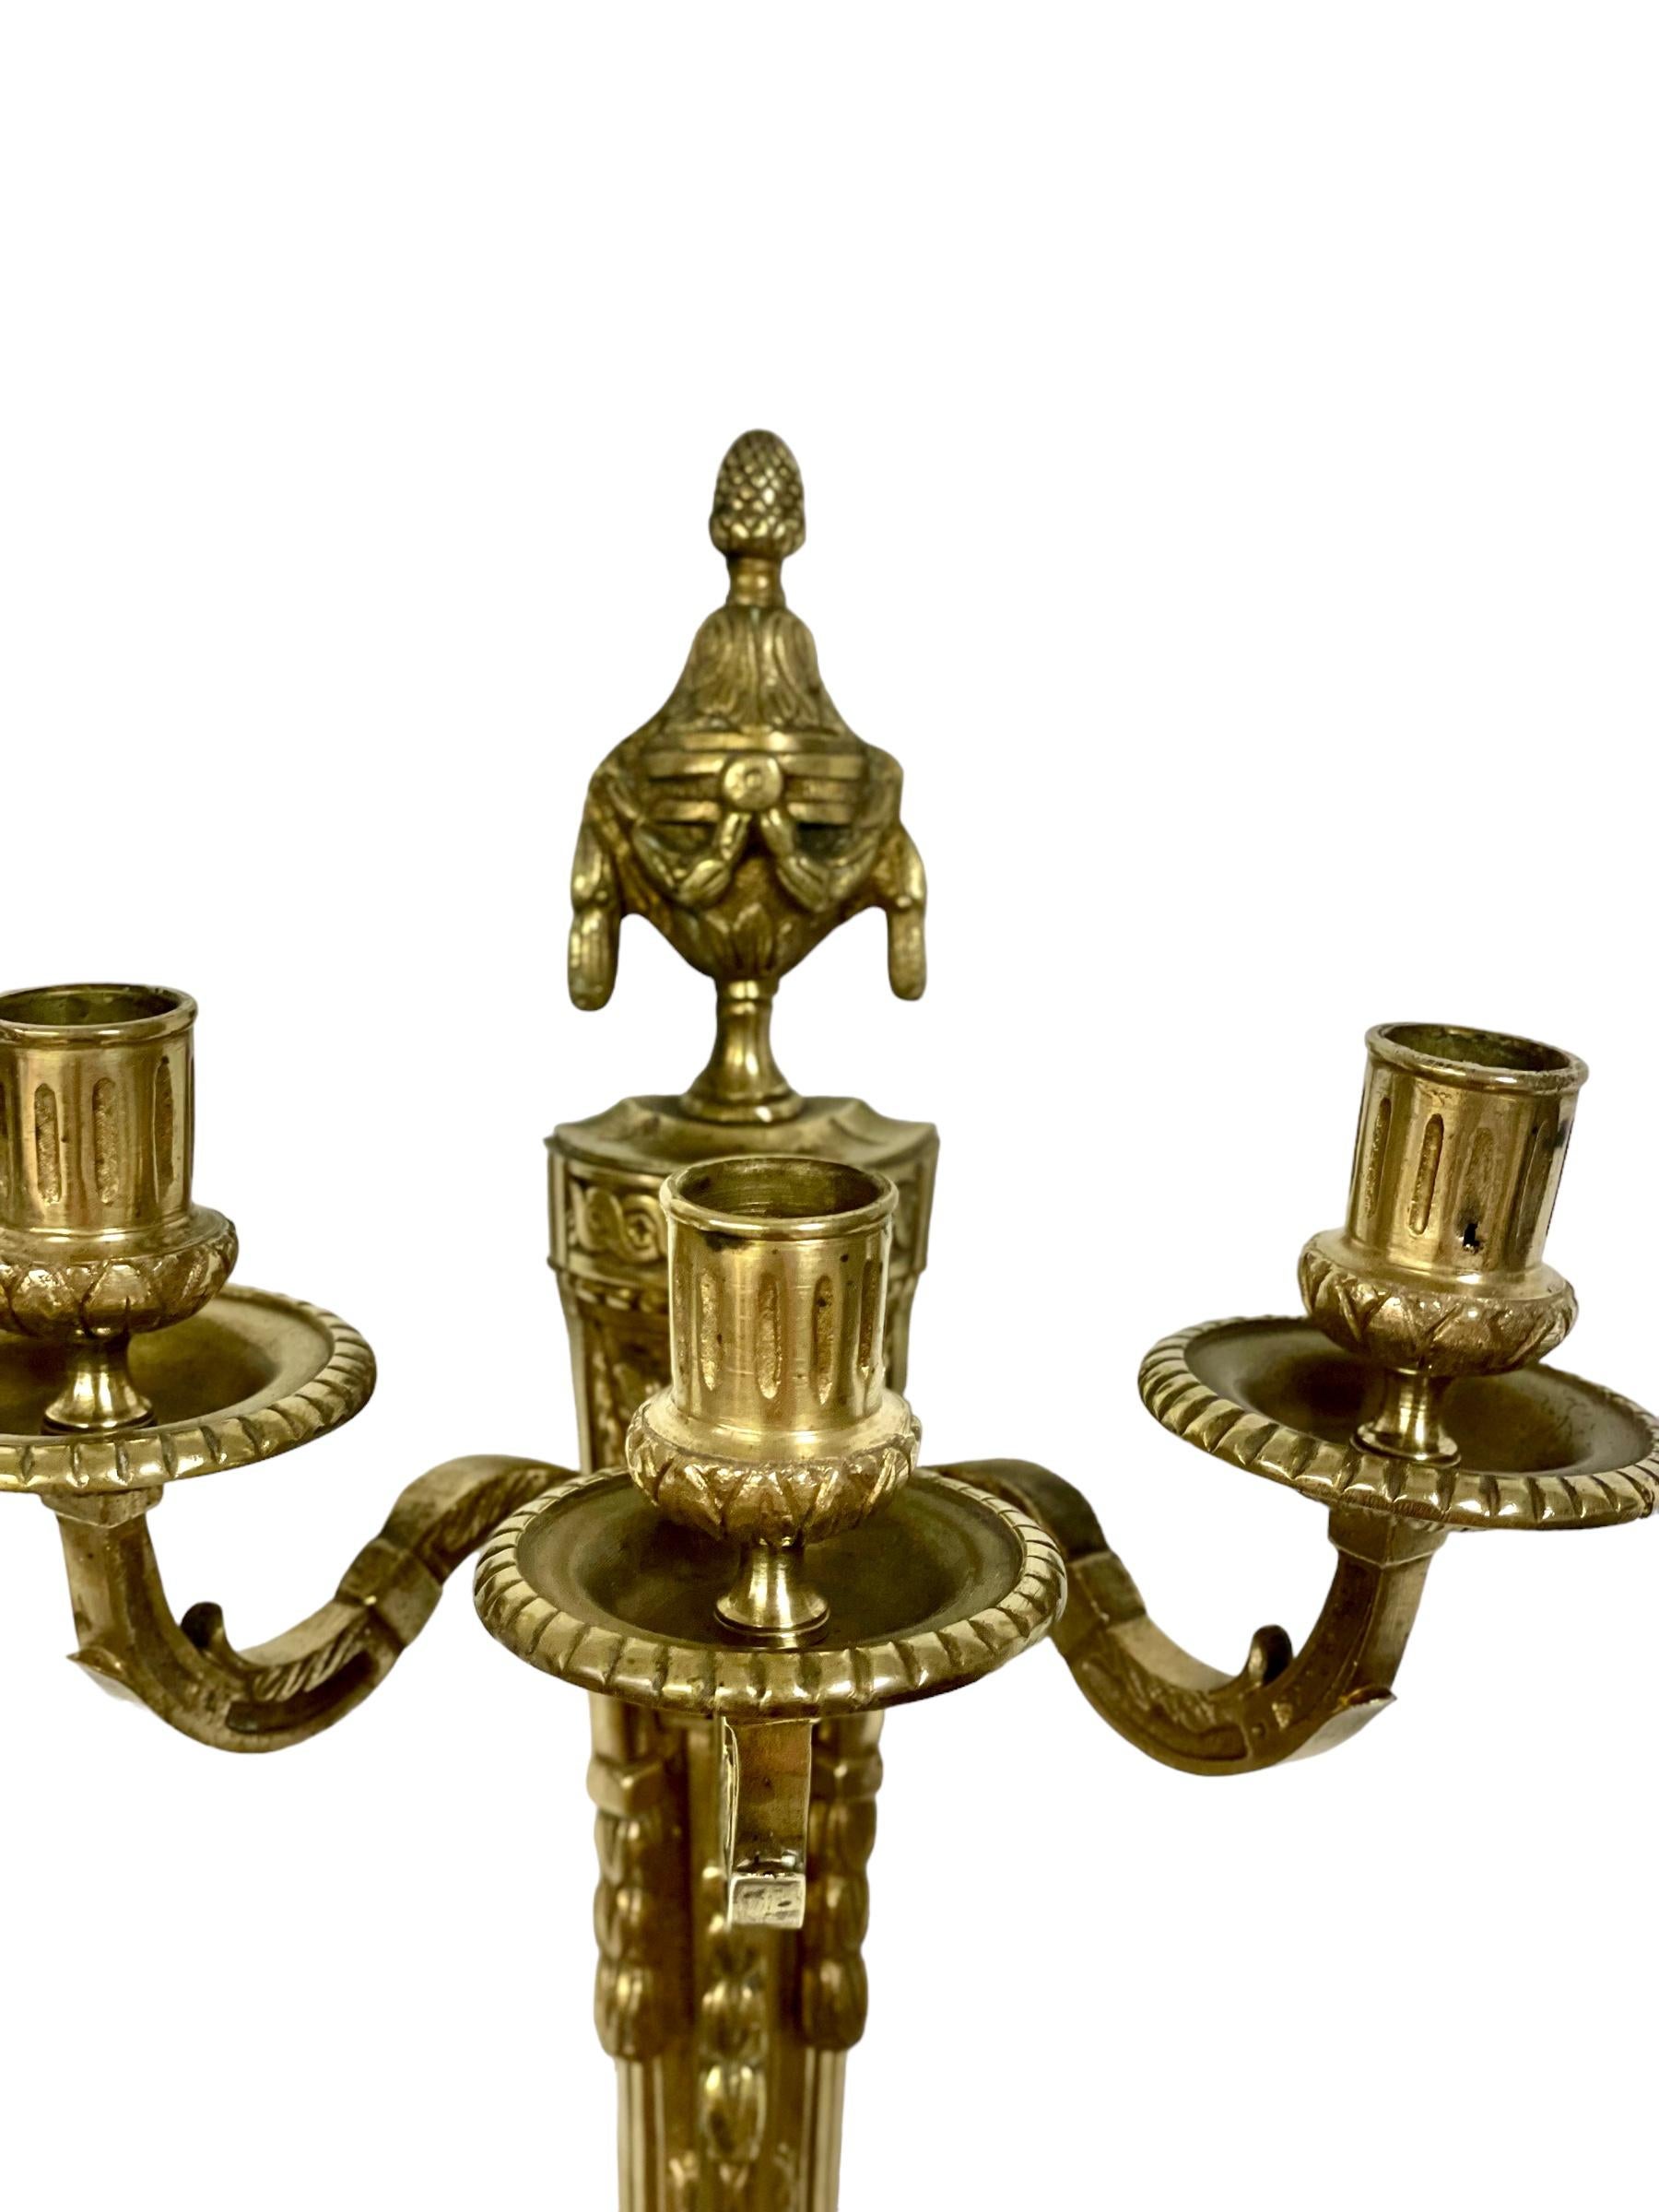 19th Century Pair of French Neoclassical Gilt Bronze Wall Sconces For Sale 4